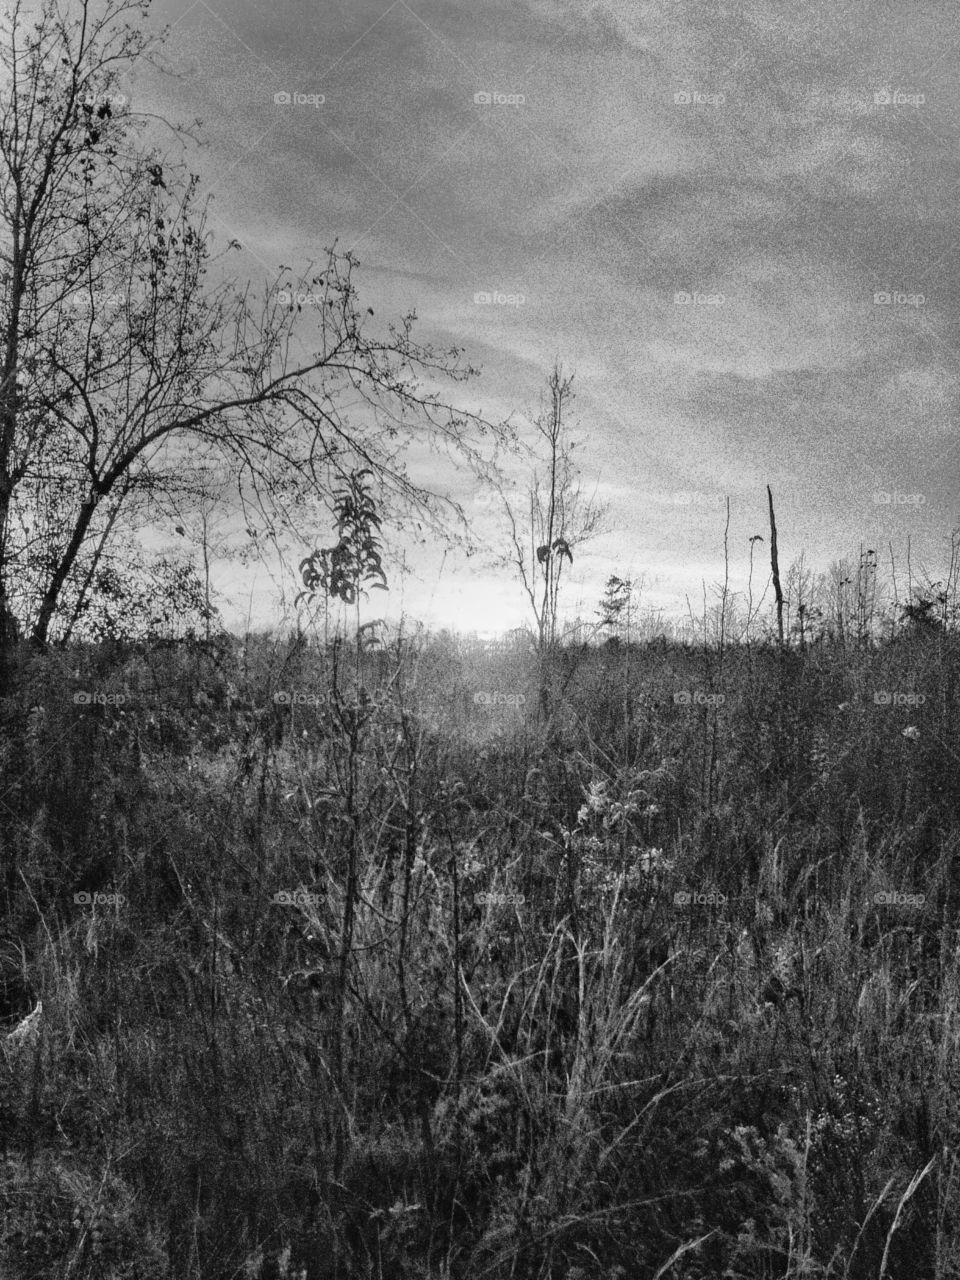 A B&W photo of a glaring autumn sunset in rural central Arkansas